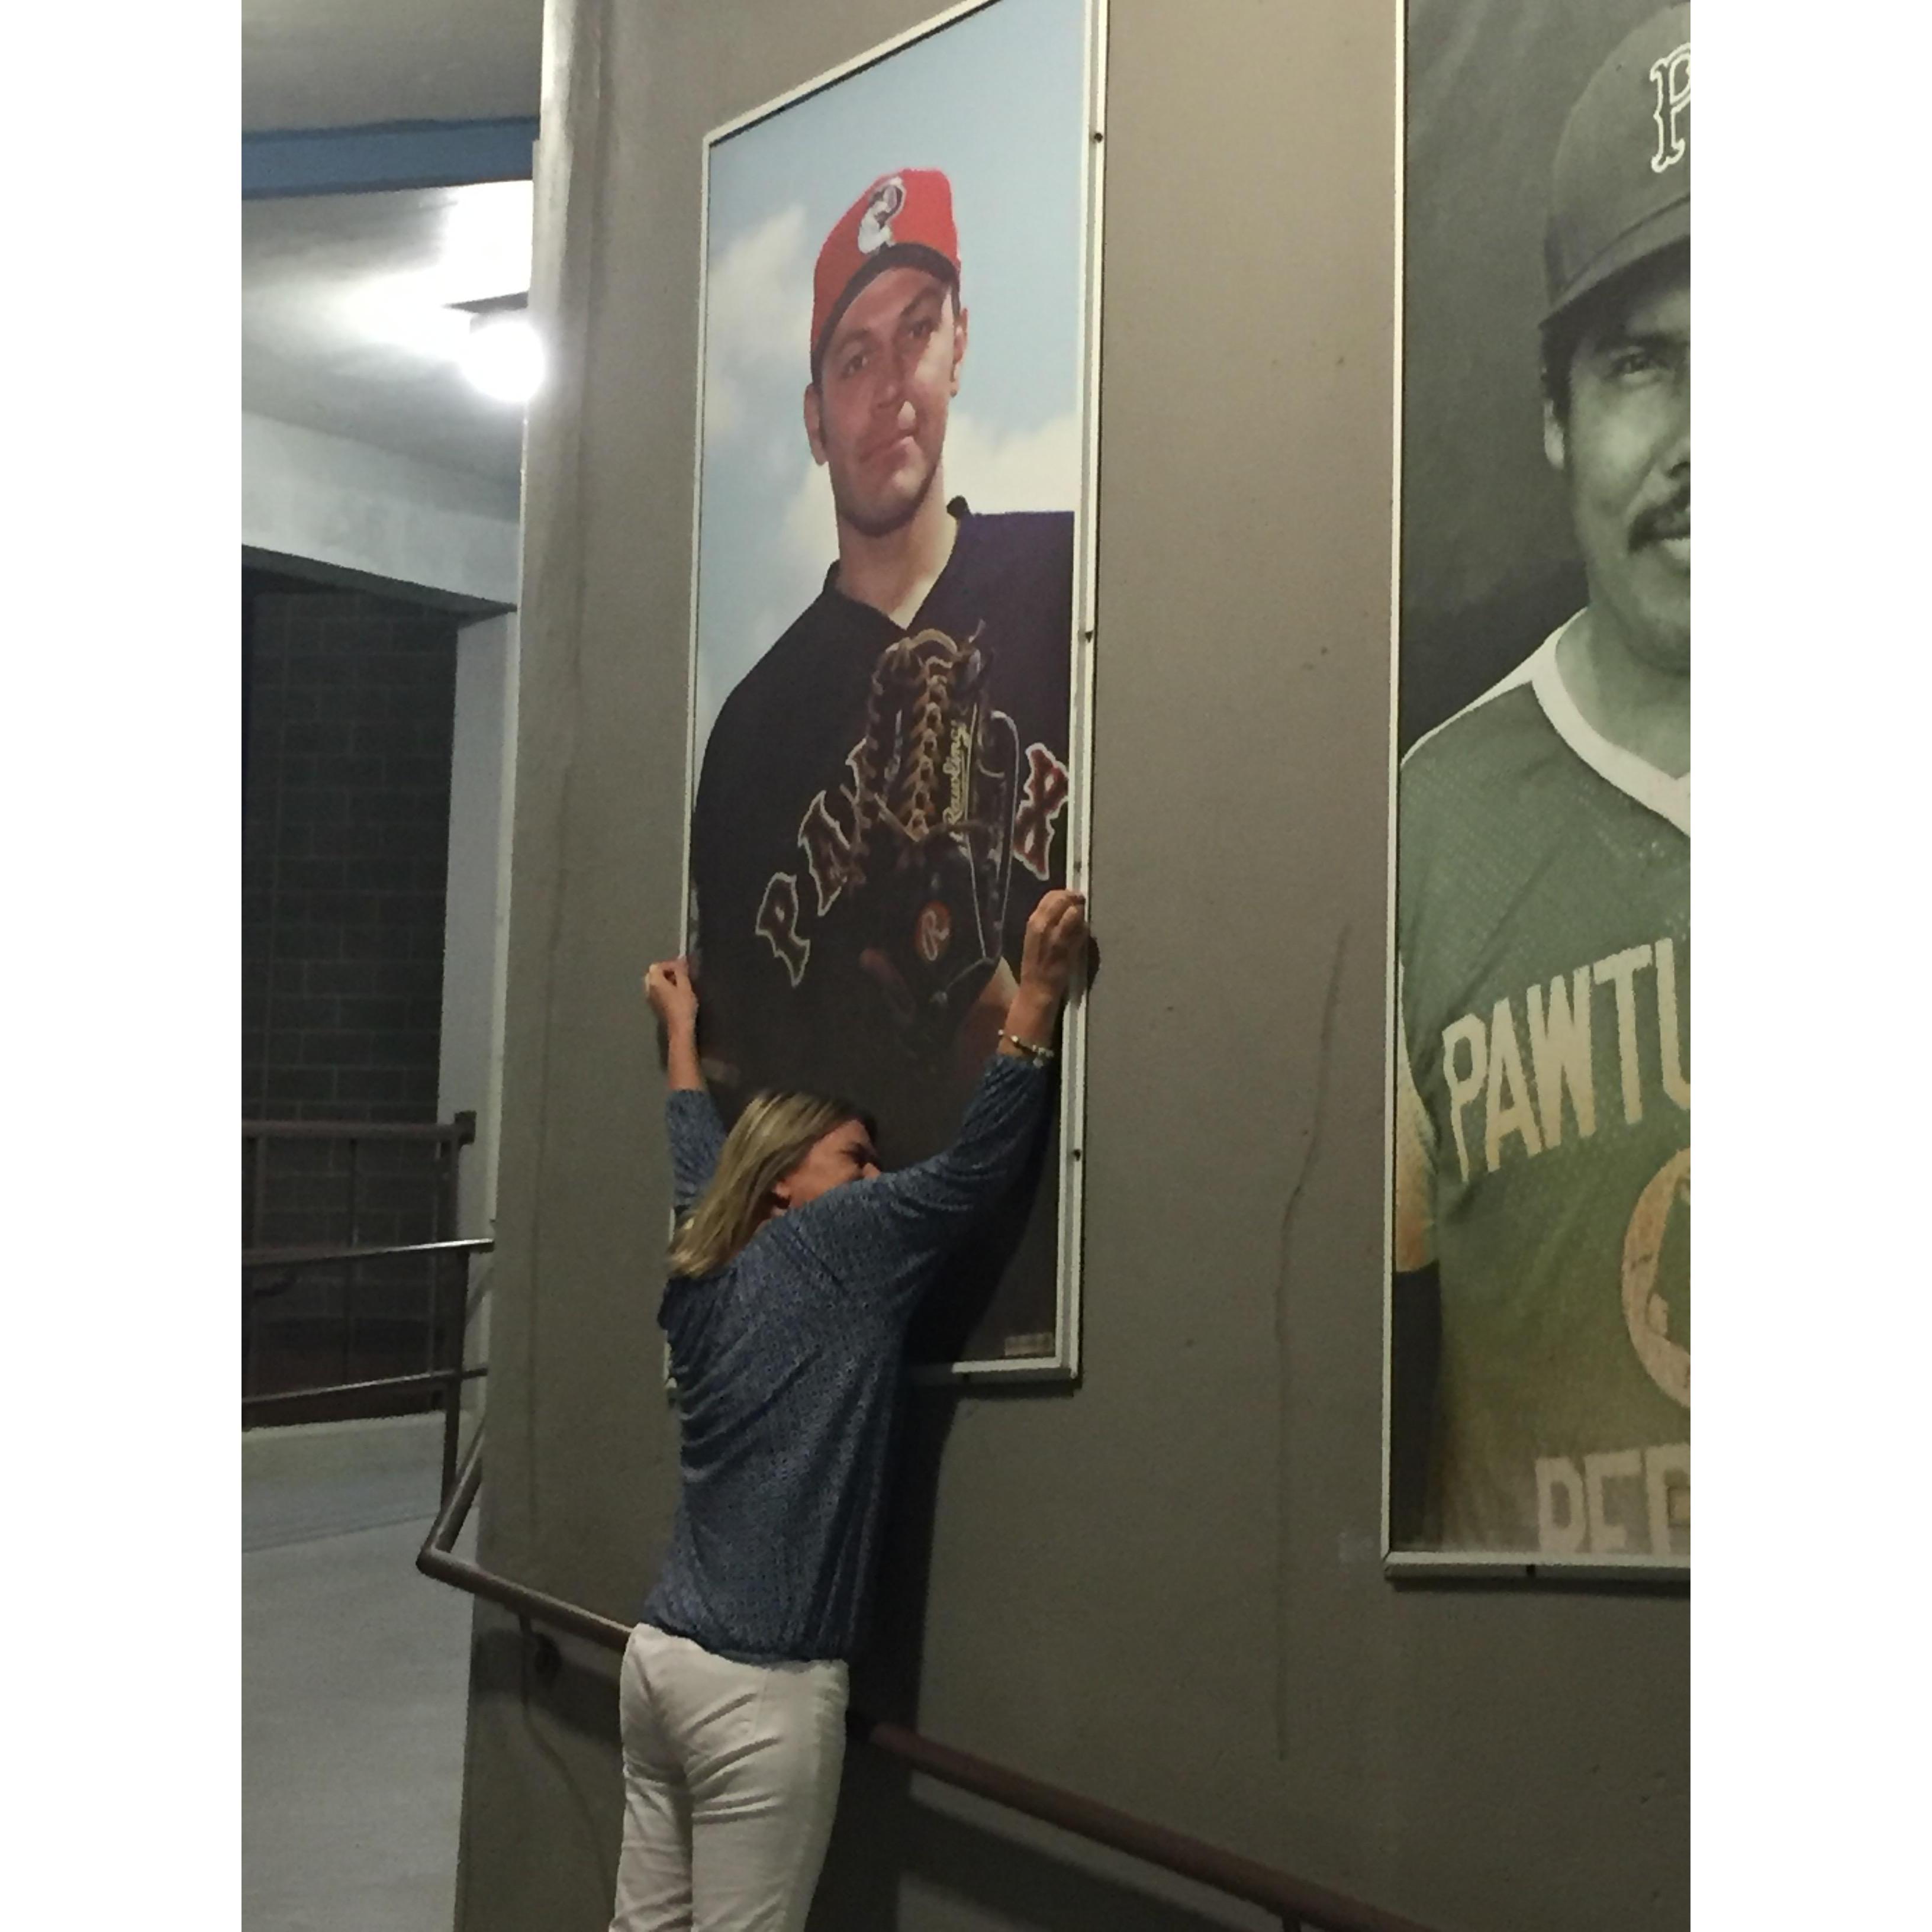 My first game in Pawtucket with Brian coaching. I was walking down to the concession stands- it’s not important why 😝- and I looked up to see Brian staring at me on the wall.